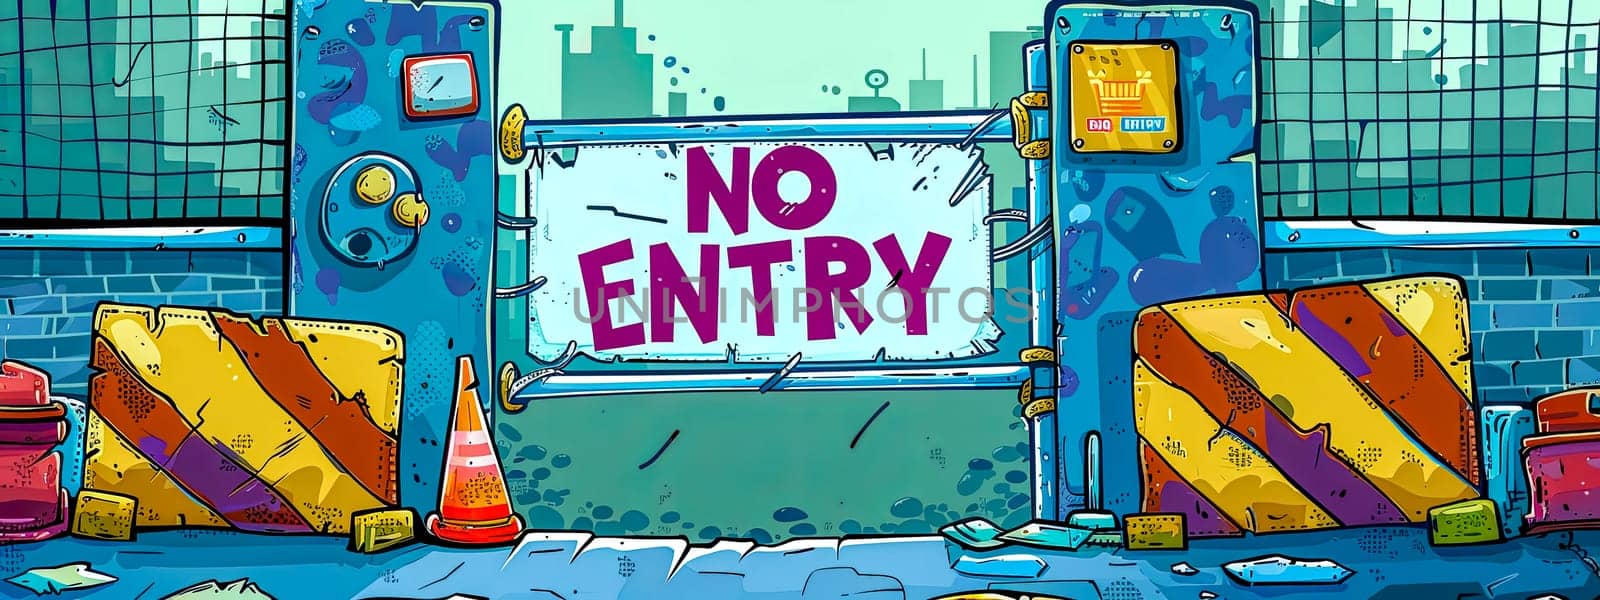 Graffiti-style no entry sign with vibrant cityscape and construction elements